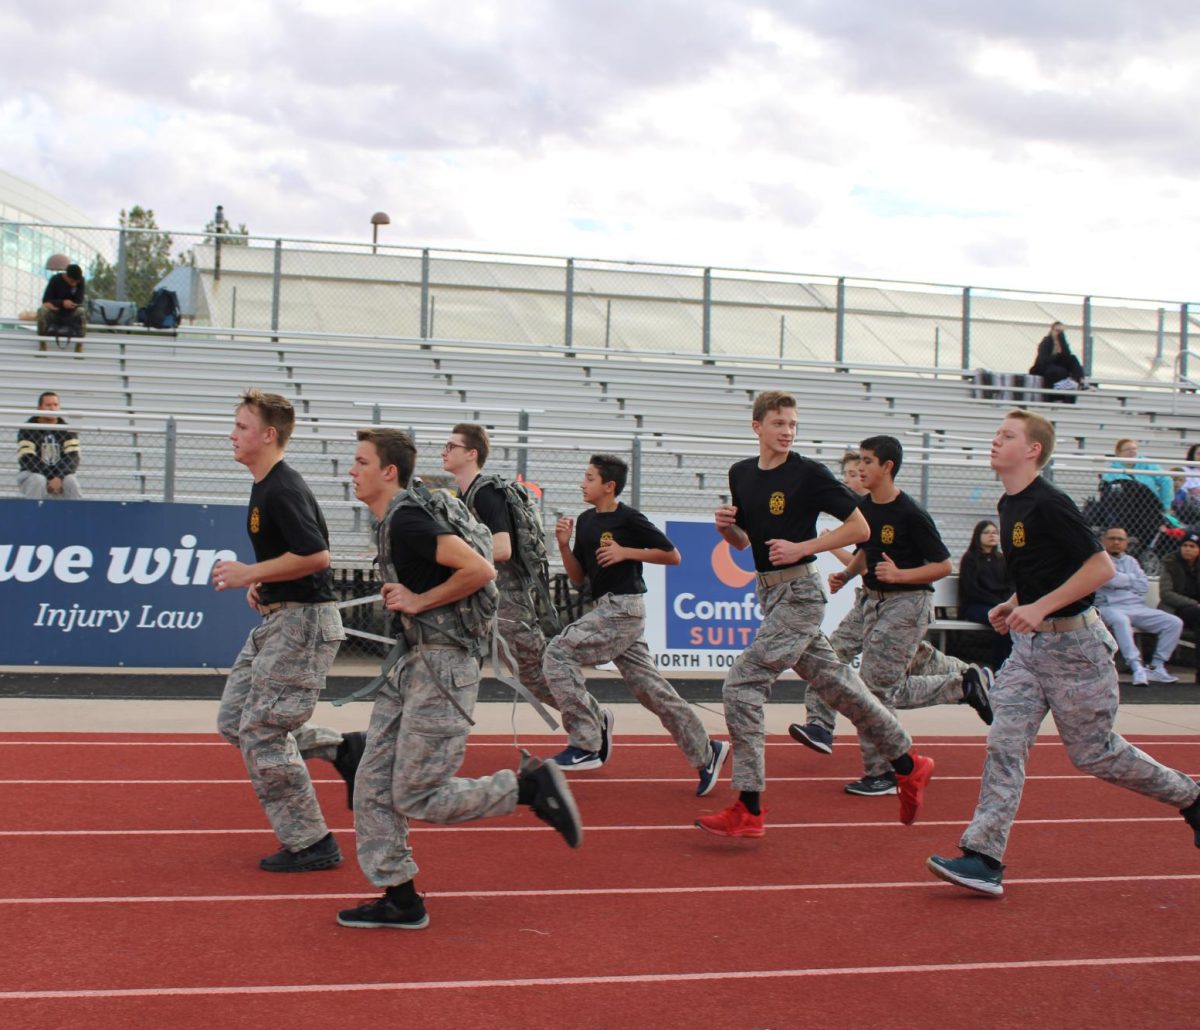 The Raider team is UMAs closest program to actual military workouts, the range wide.